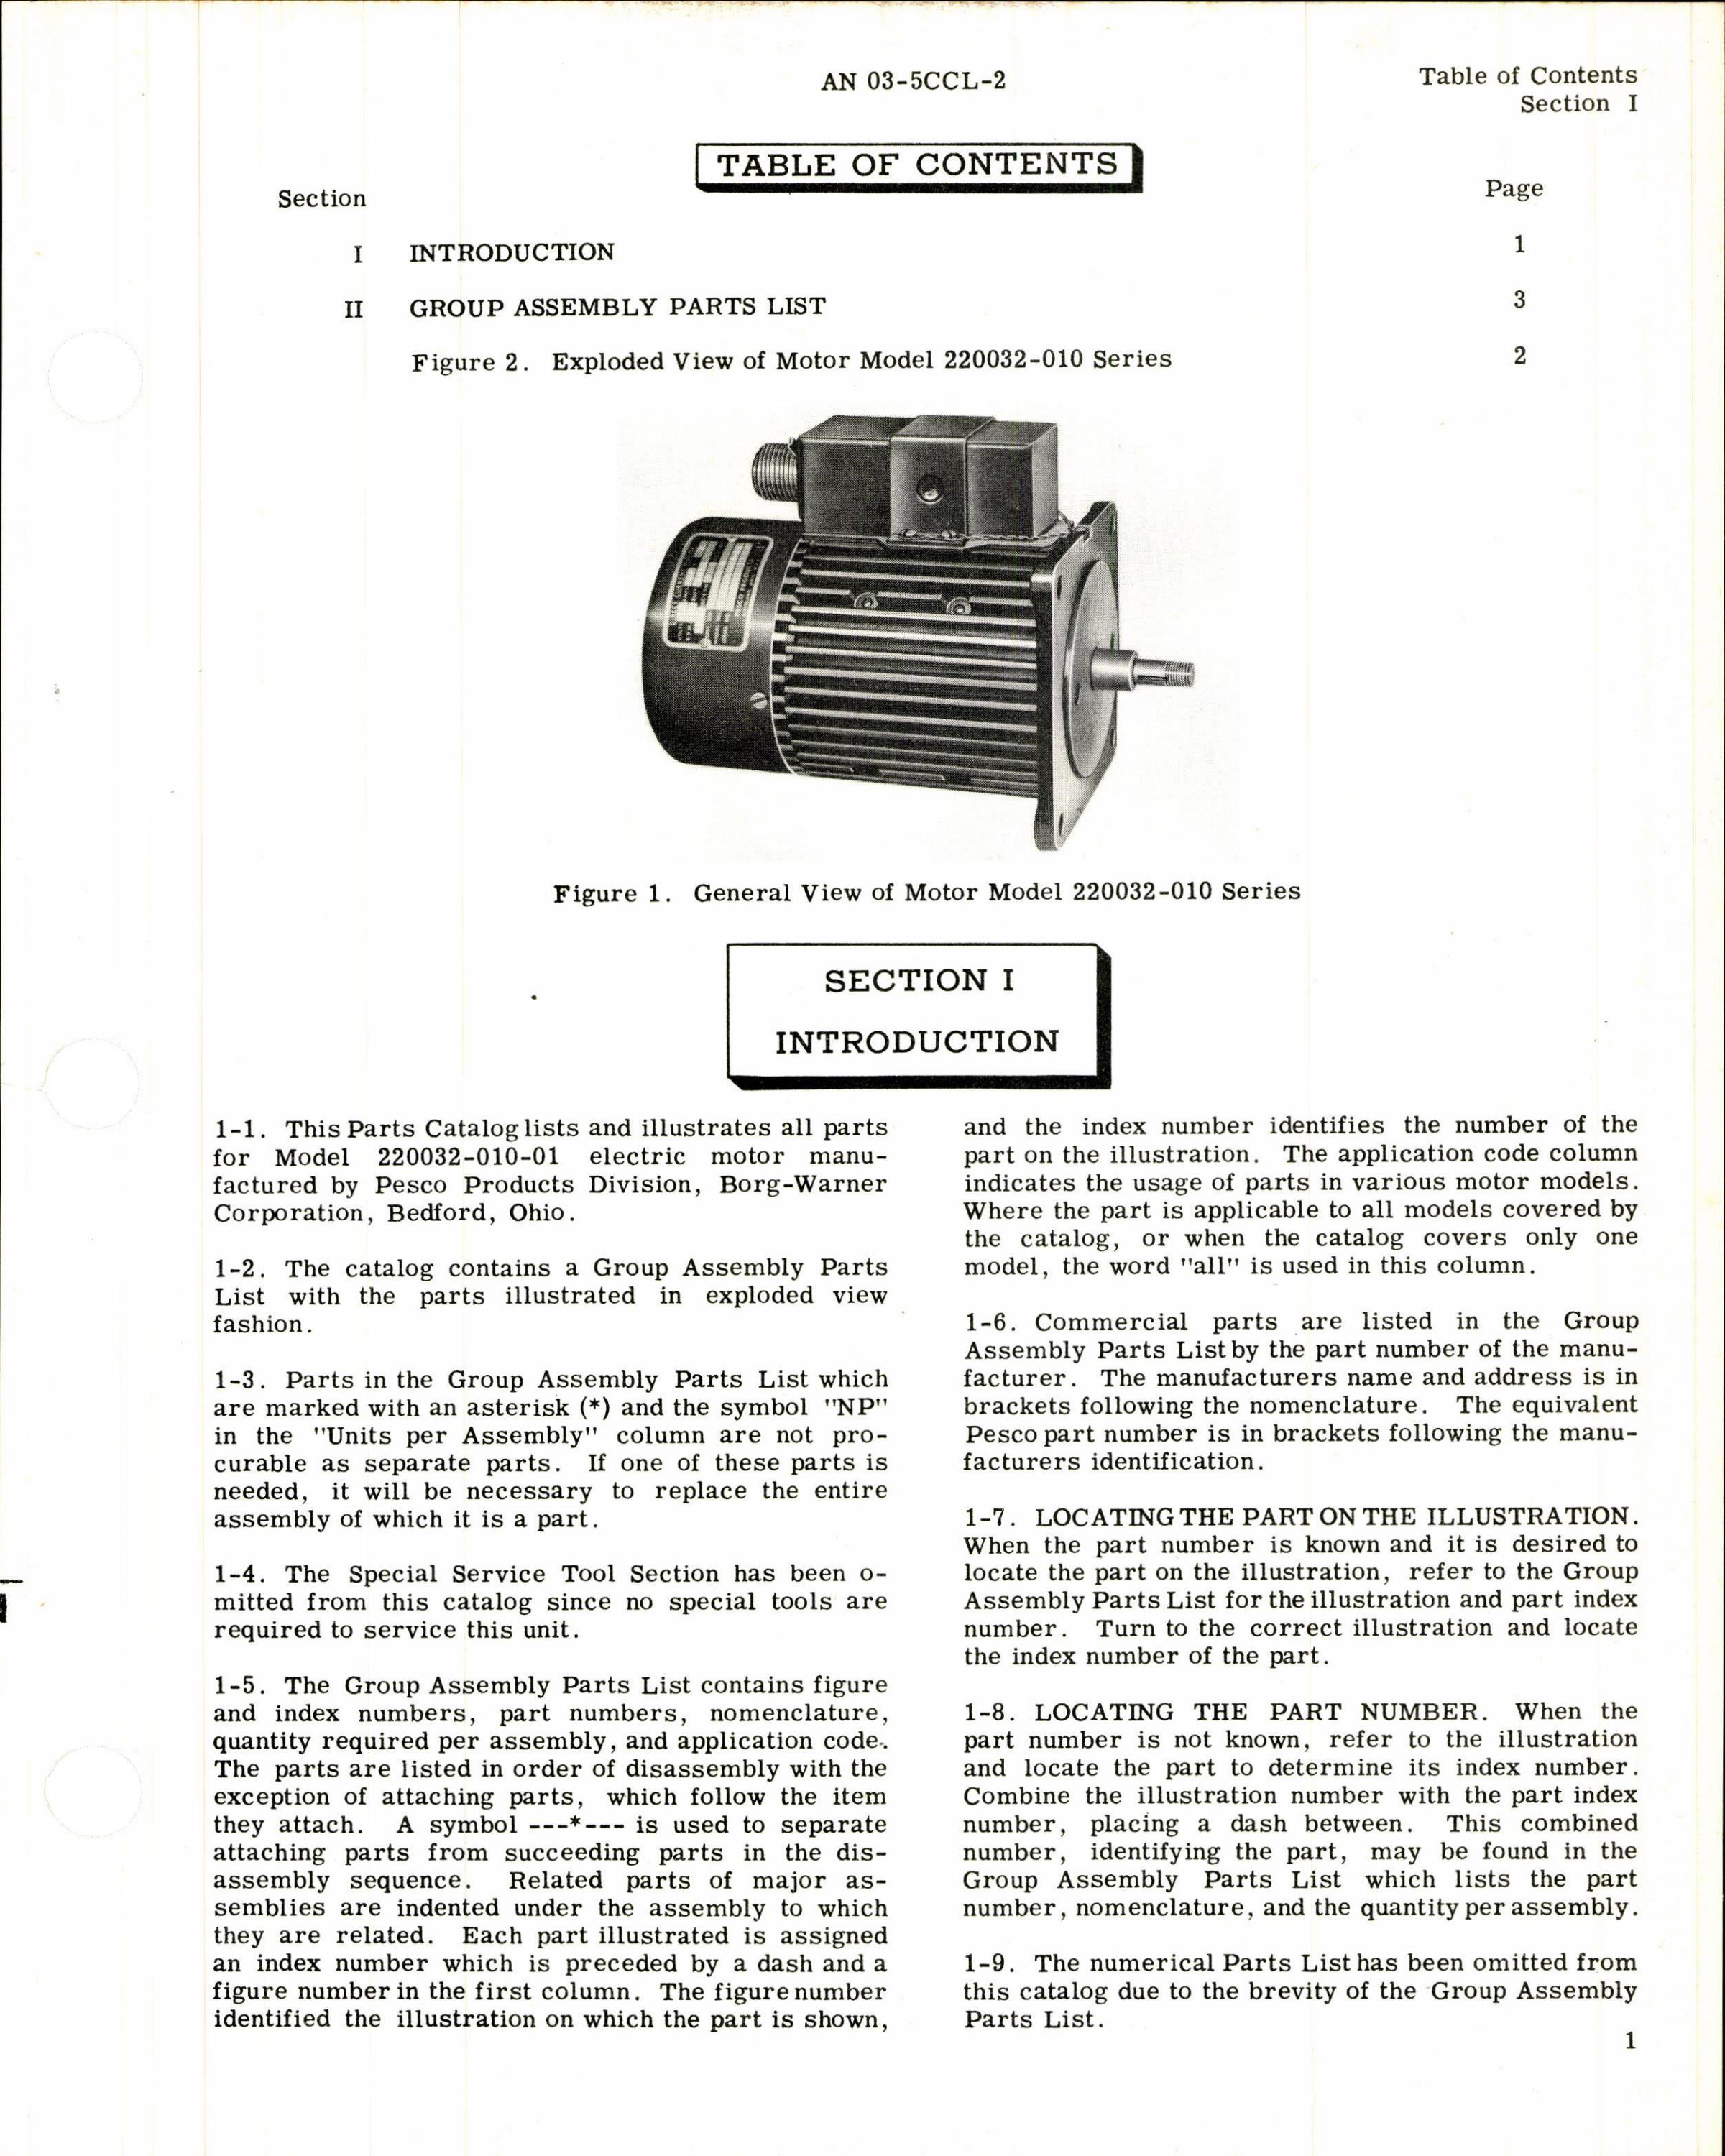 Sample page 3 from AirCorps Library document: Parts Catalog for Pesco Electric Motors, Model 220032 Series